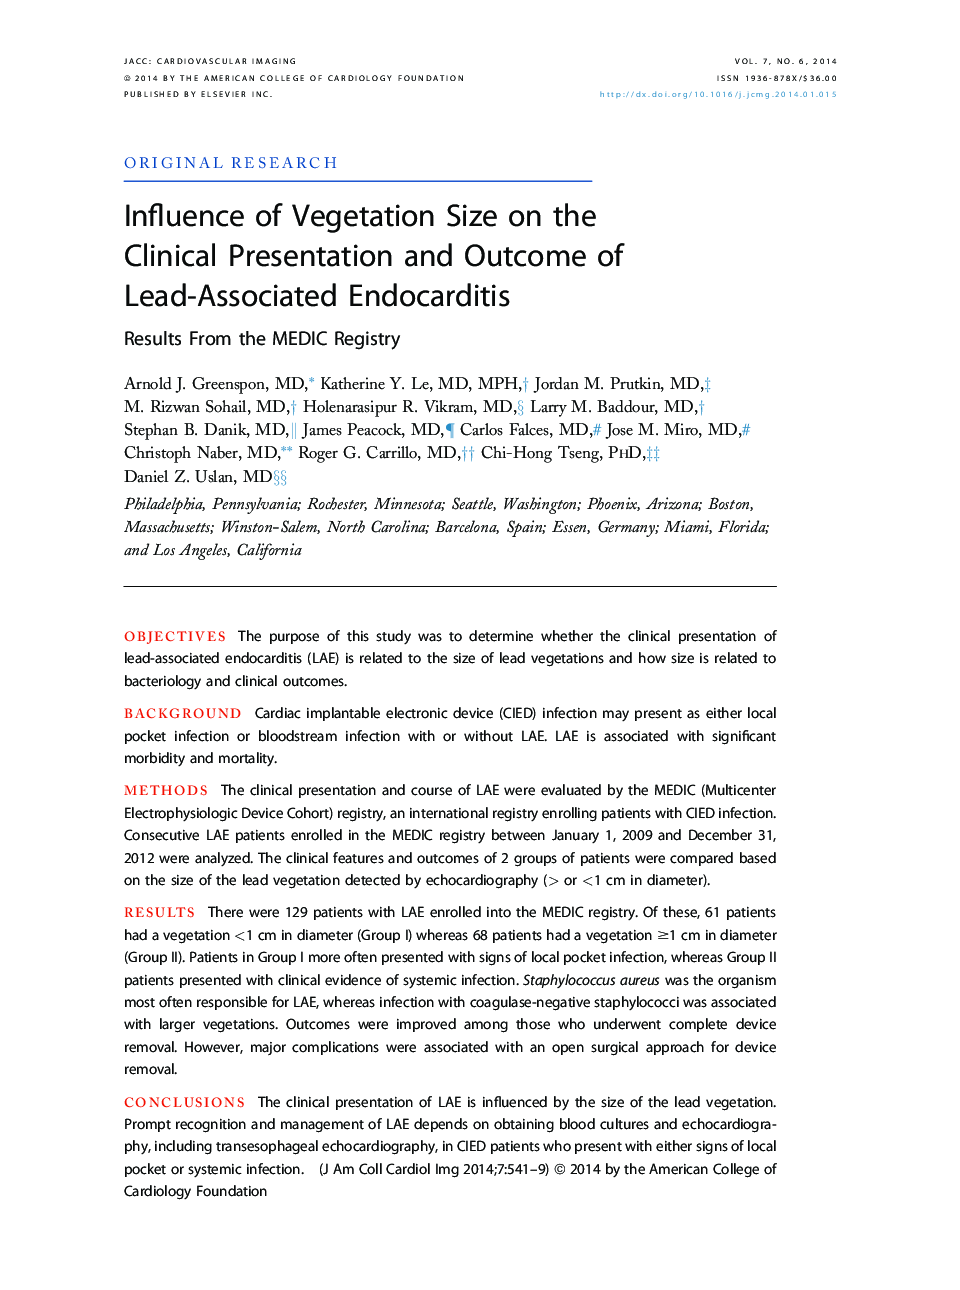 Influence of Vegetation Size on the Clinical Presentation and Outcome of Lead-Associated Endocarditis : Results From the MEDIC Registry